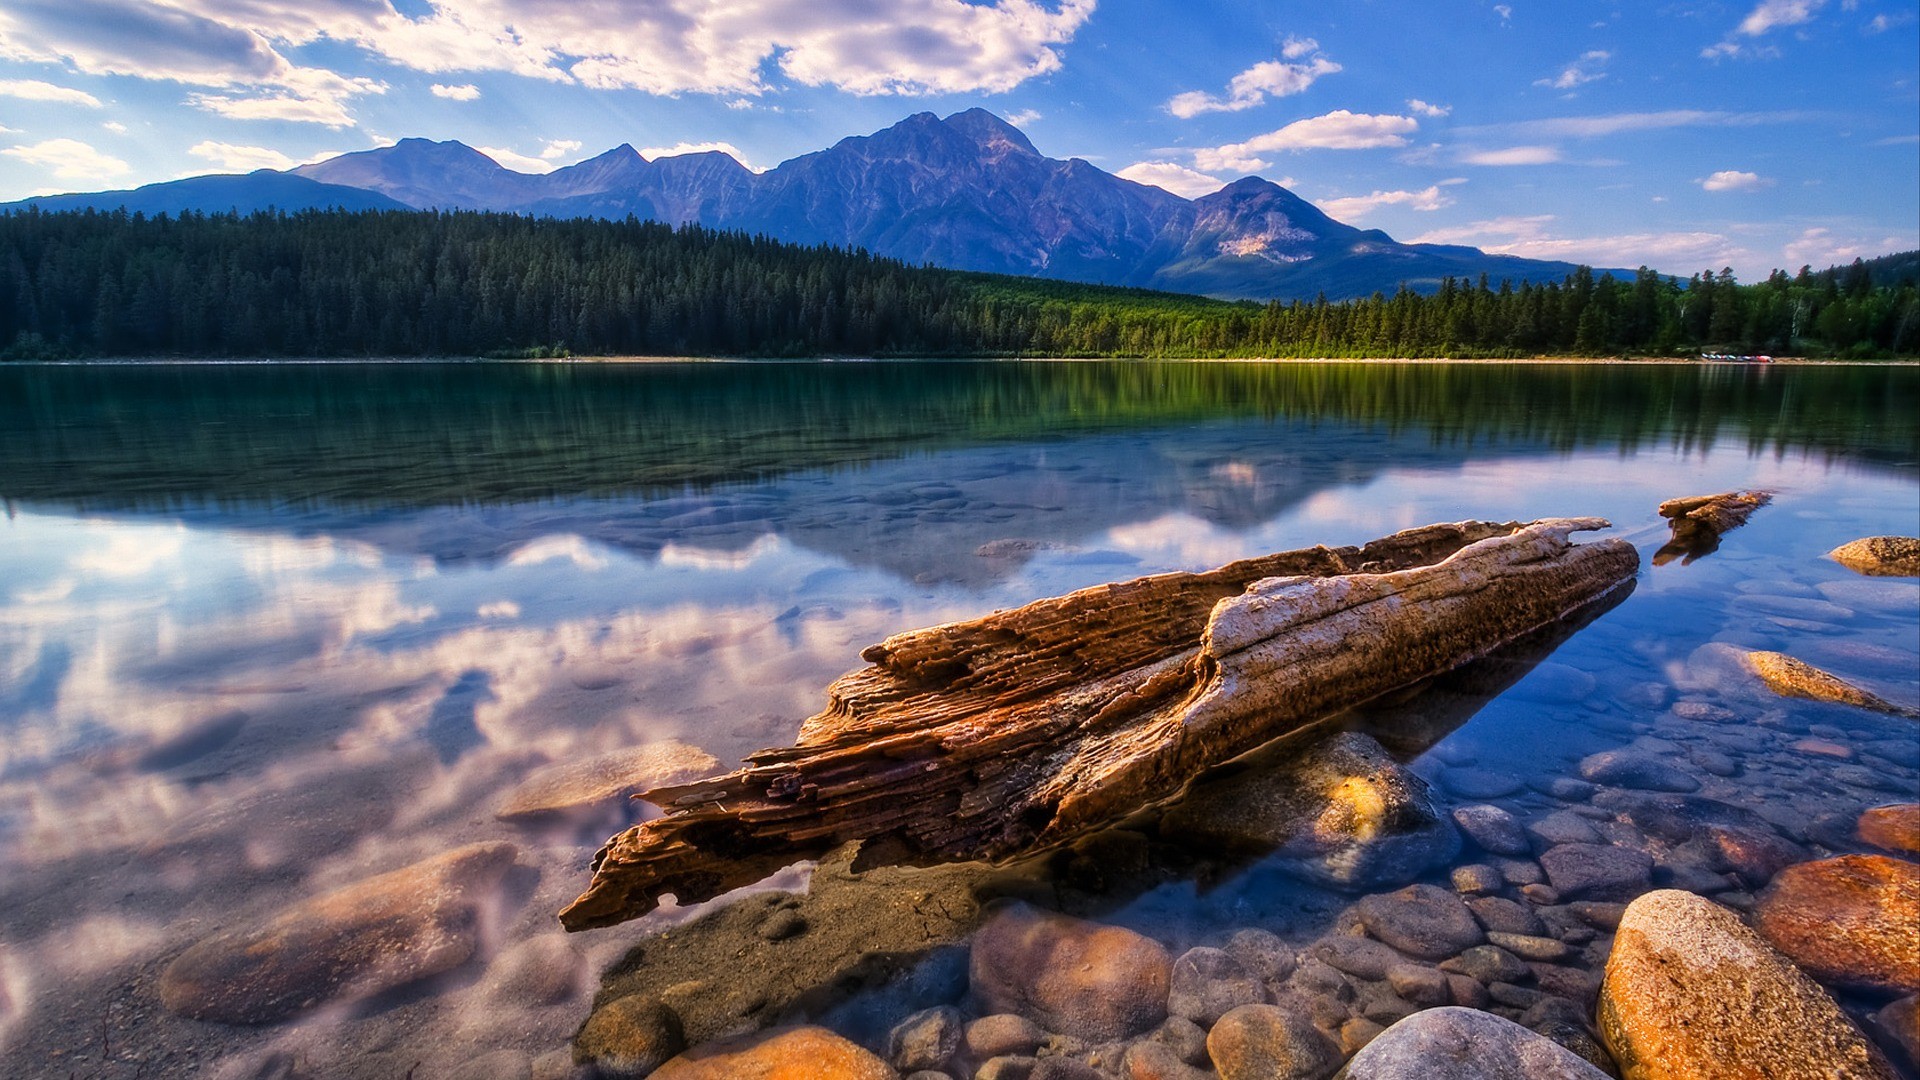 General 1920x1080 nature wood mountains reflection water